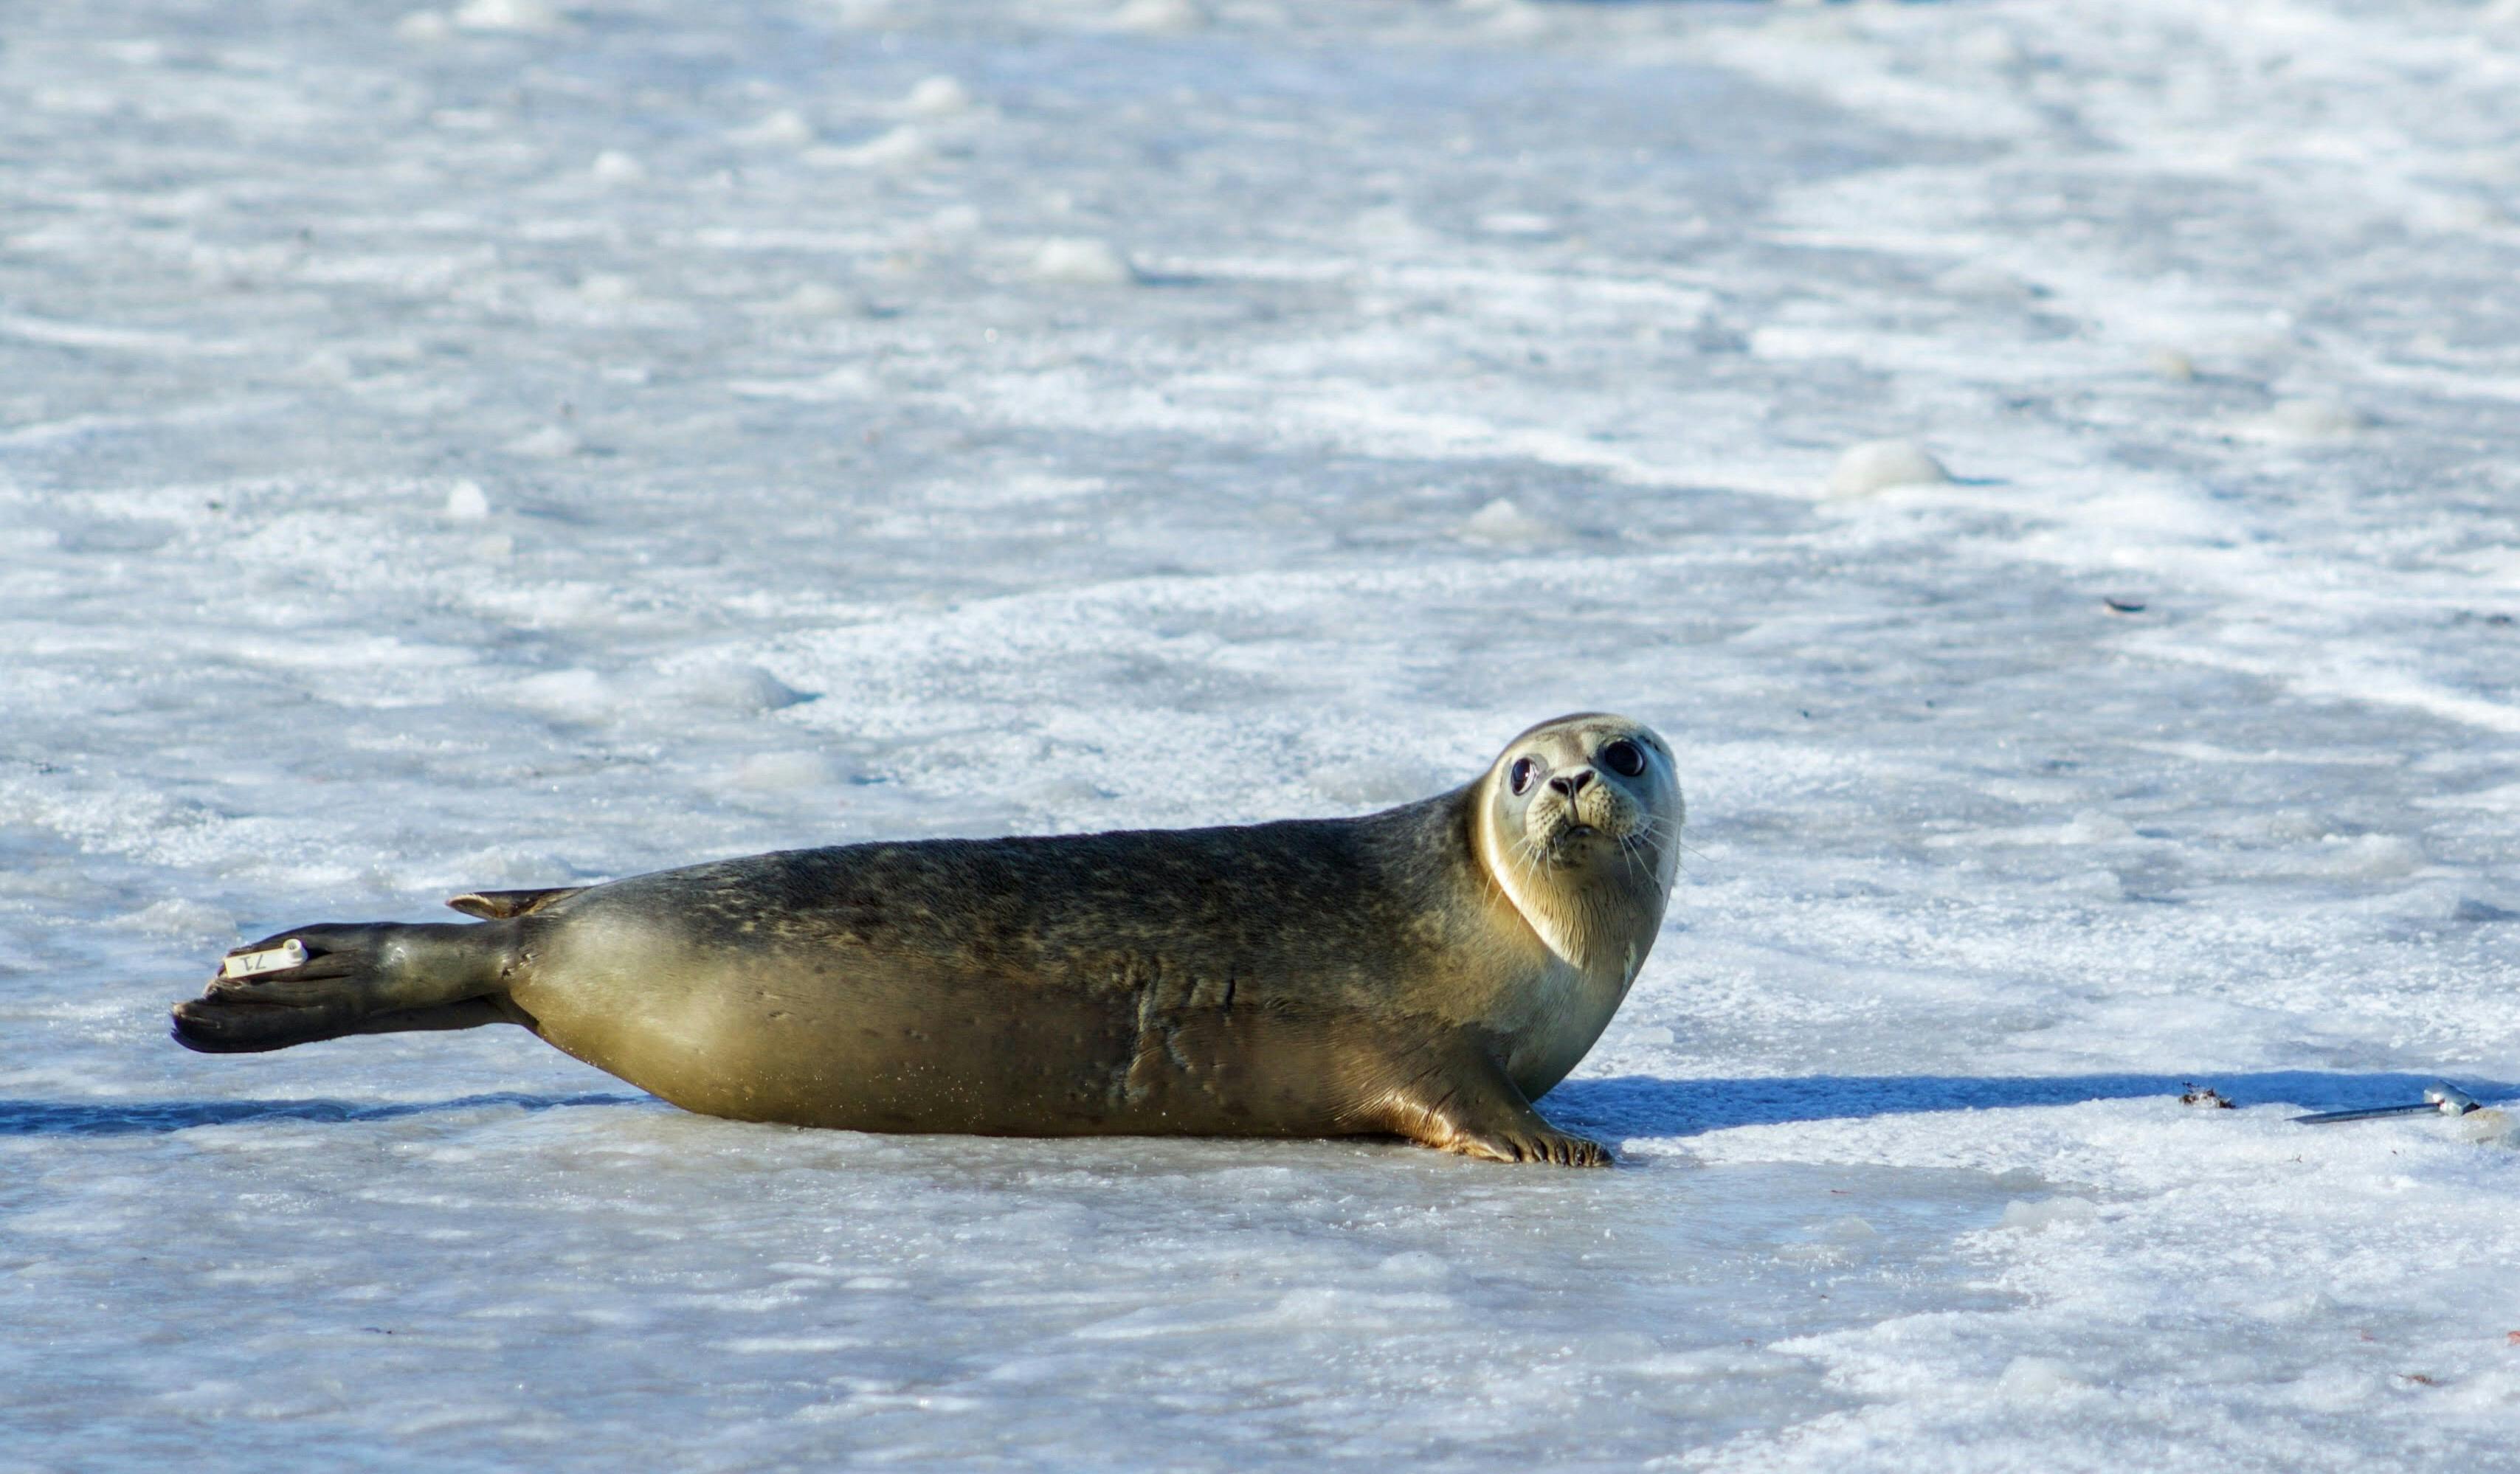 “Photo of Gray Seal on Ice” by Jen Healy on Pexels